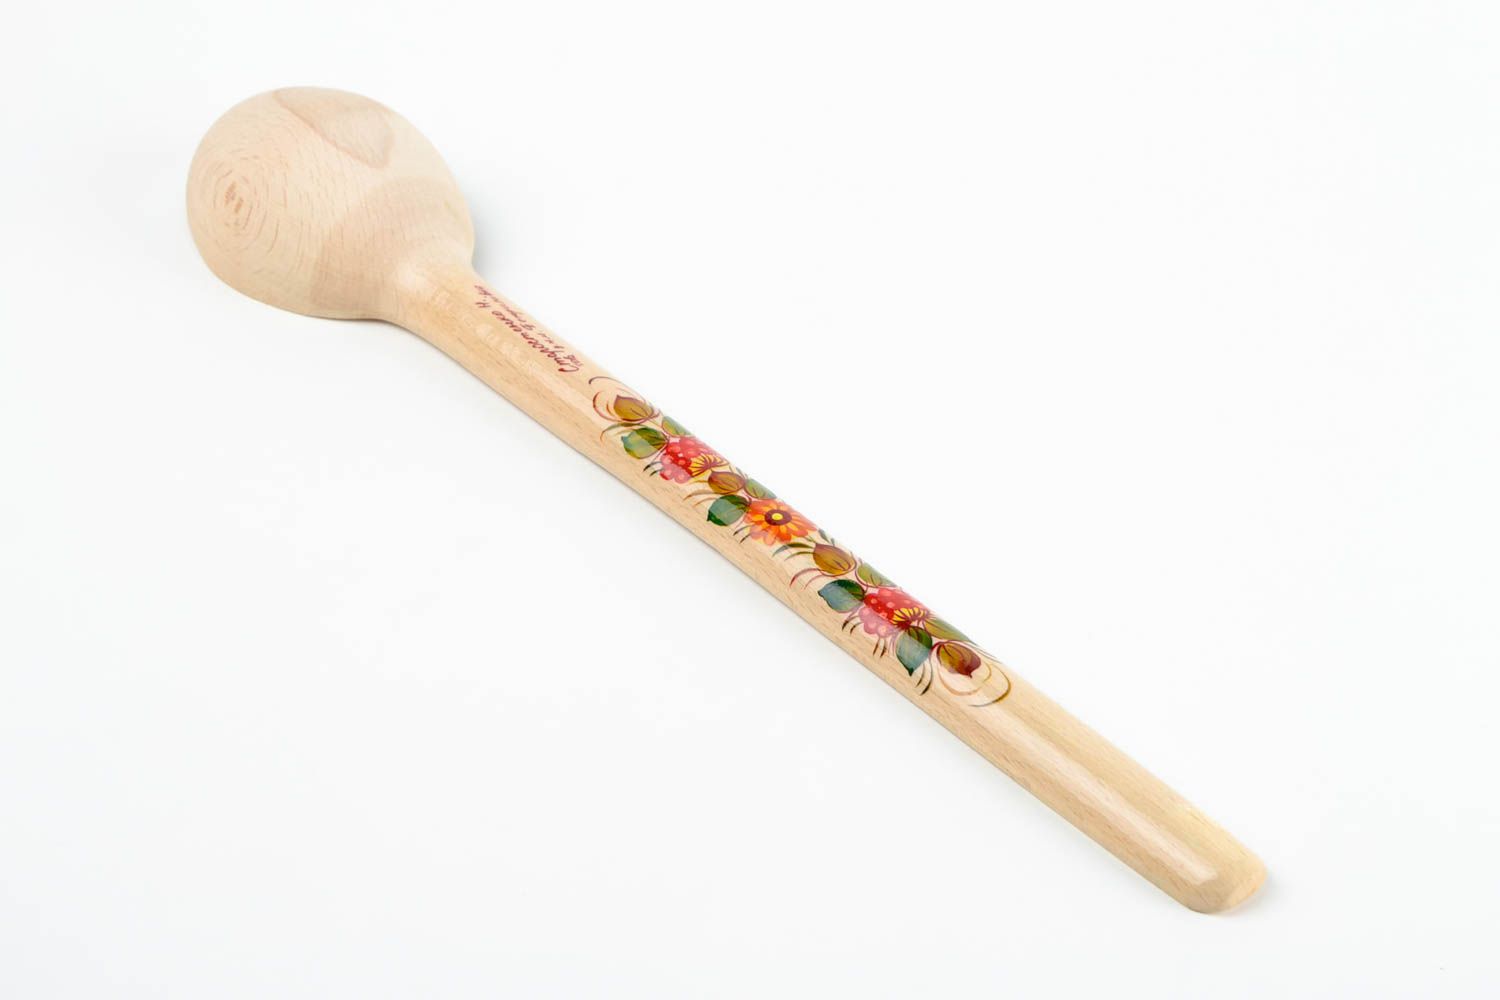 Handmade stylish wooden ware unusual painted spoon cute kitchen accessory photo 5